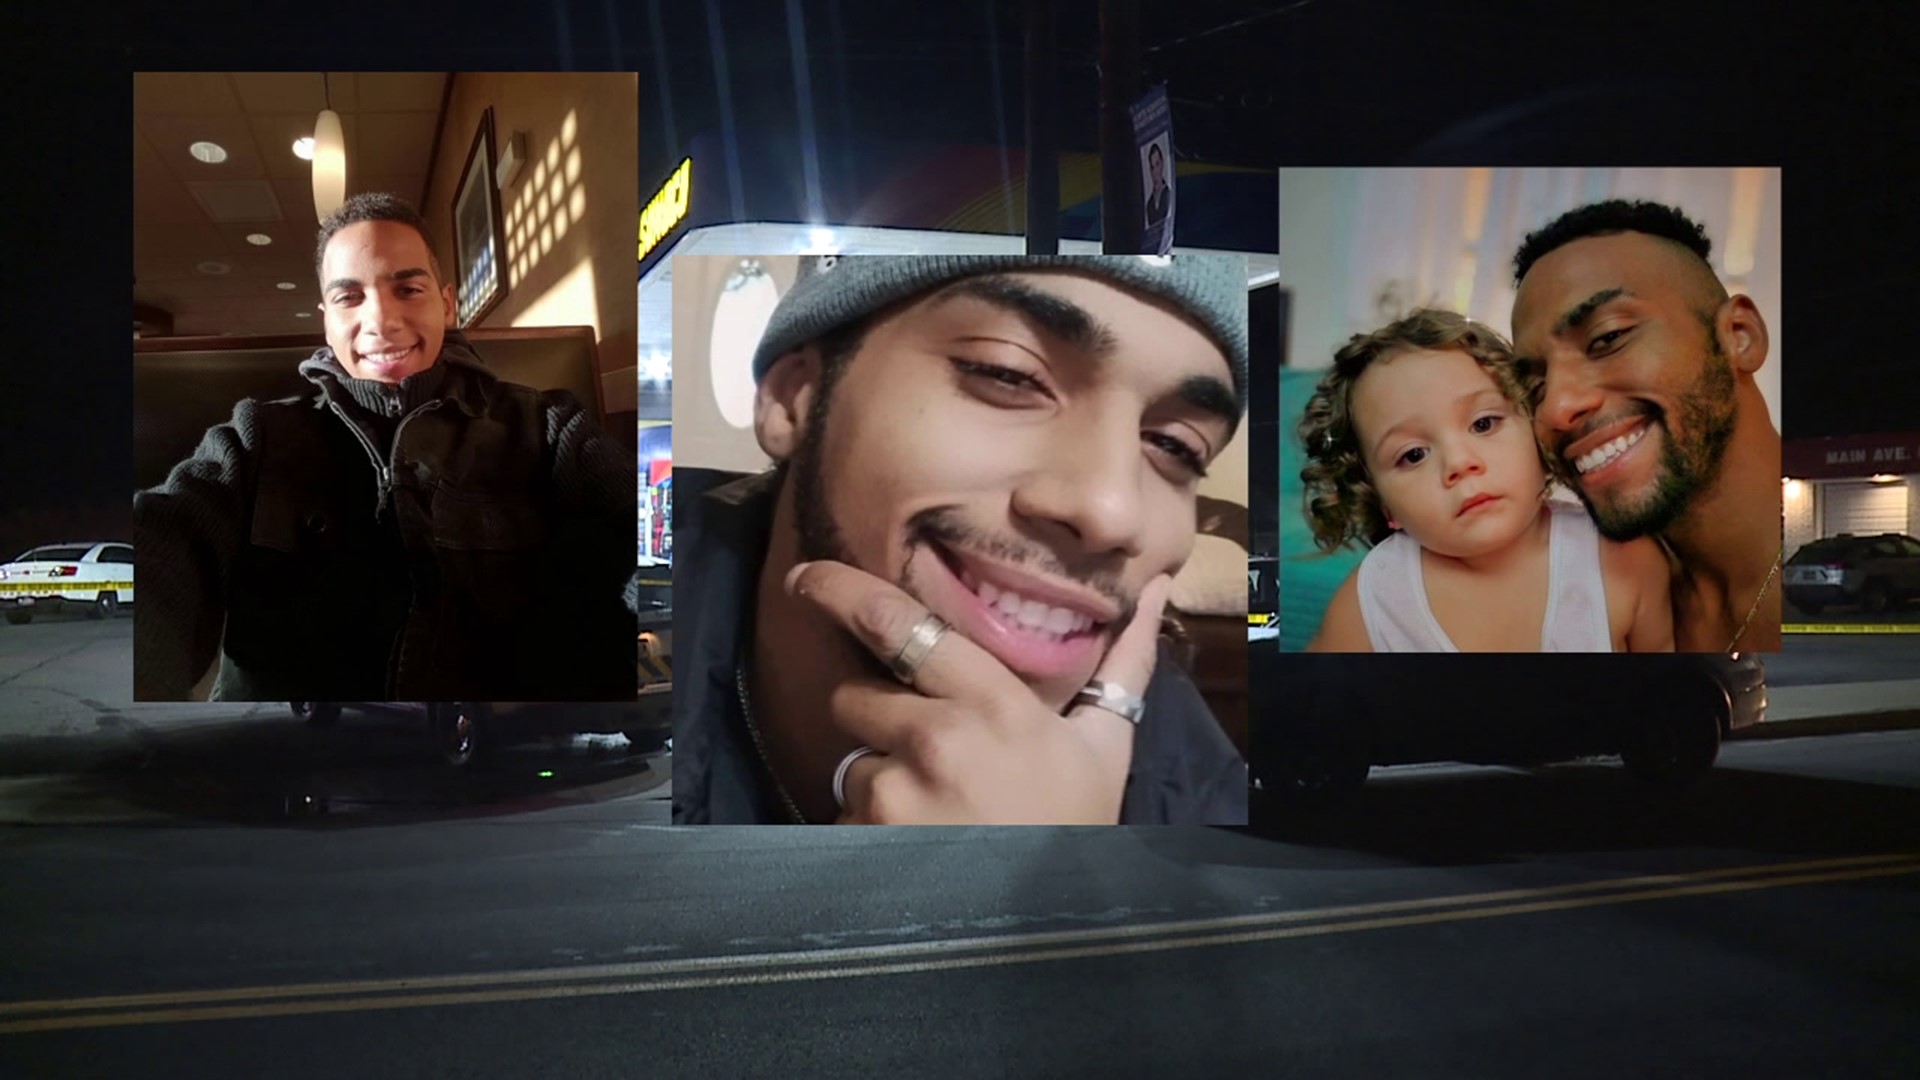 Jose Tatis succumbed to his injuries Saturday after being shot during a violent robbery at a gas station on North Main Avenue in Scranton last Thursday.